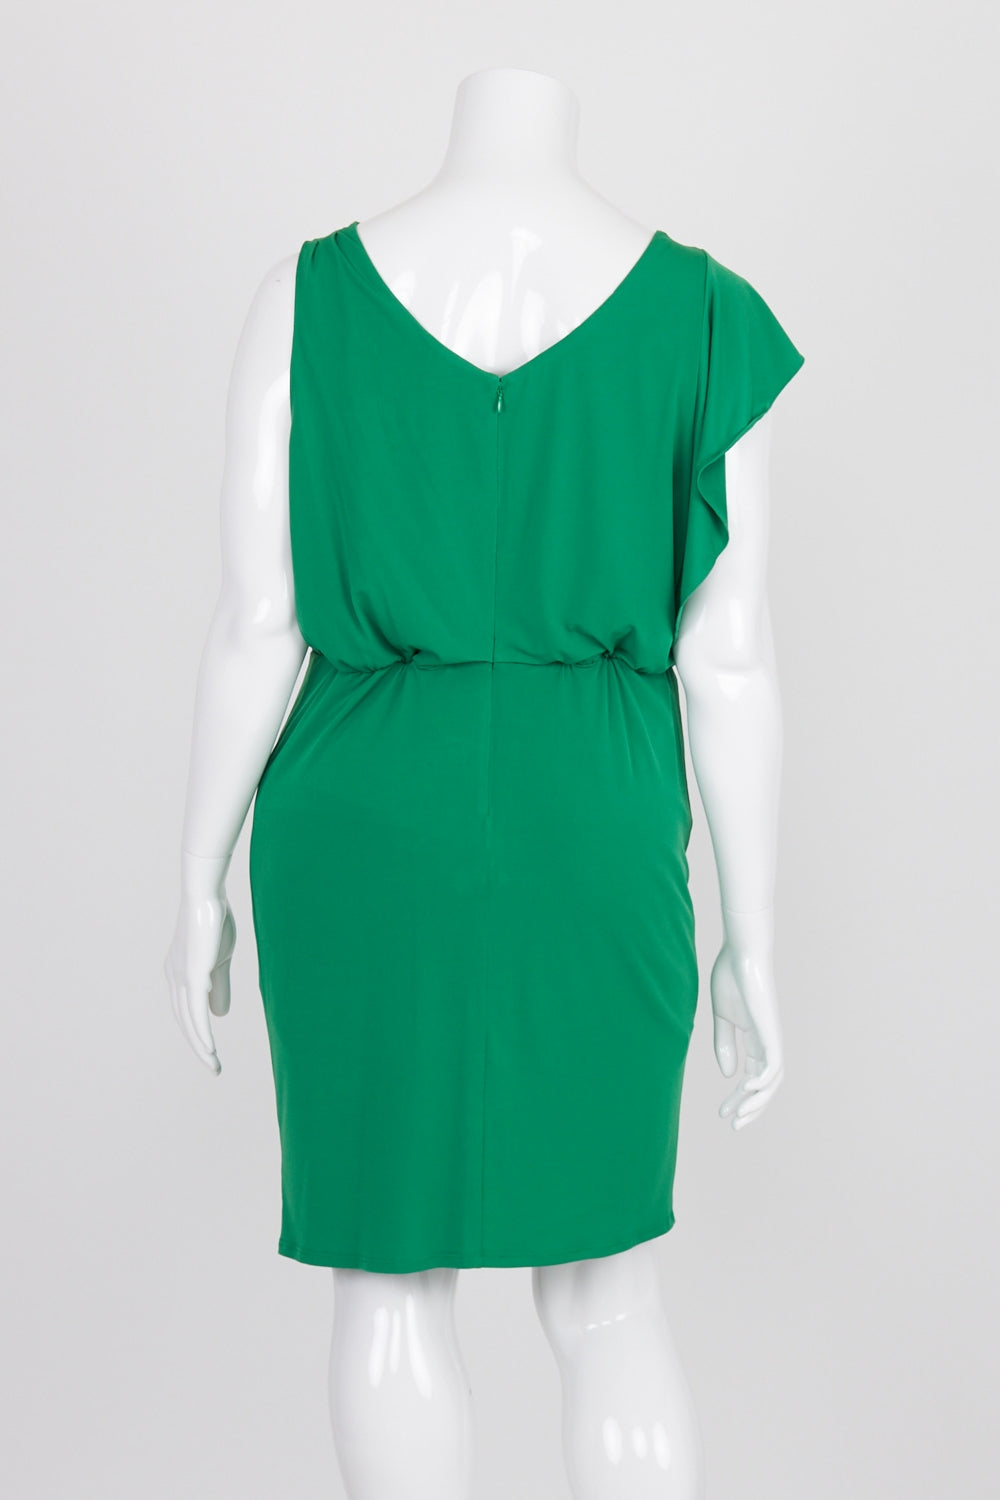 Vince Camuto Green Pleated Front Dress 12